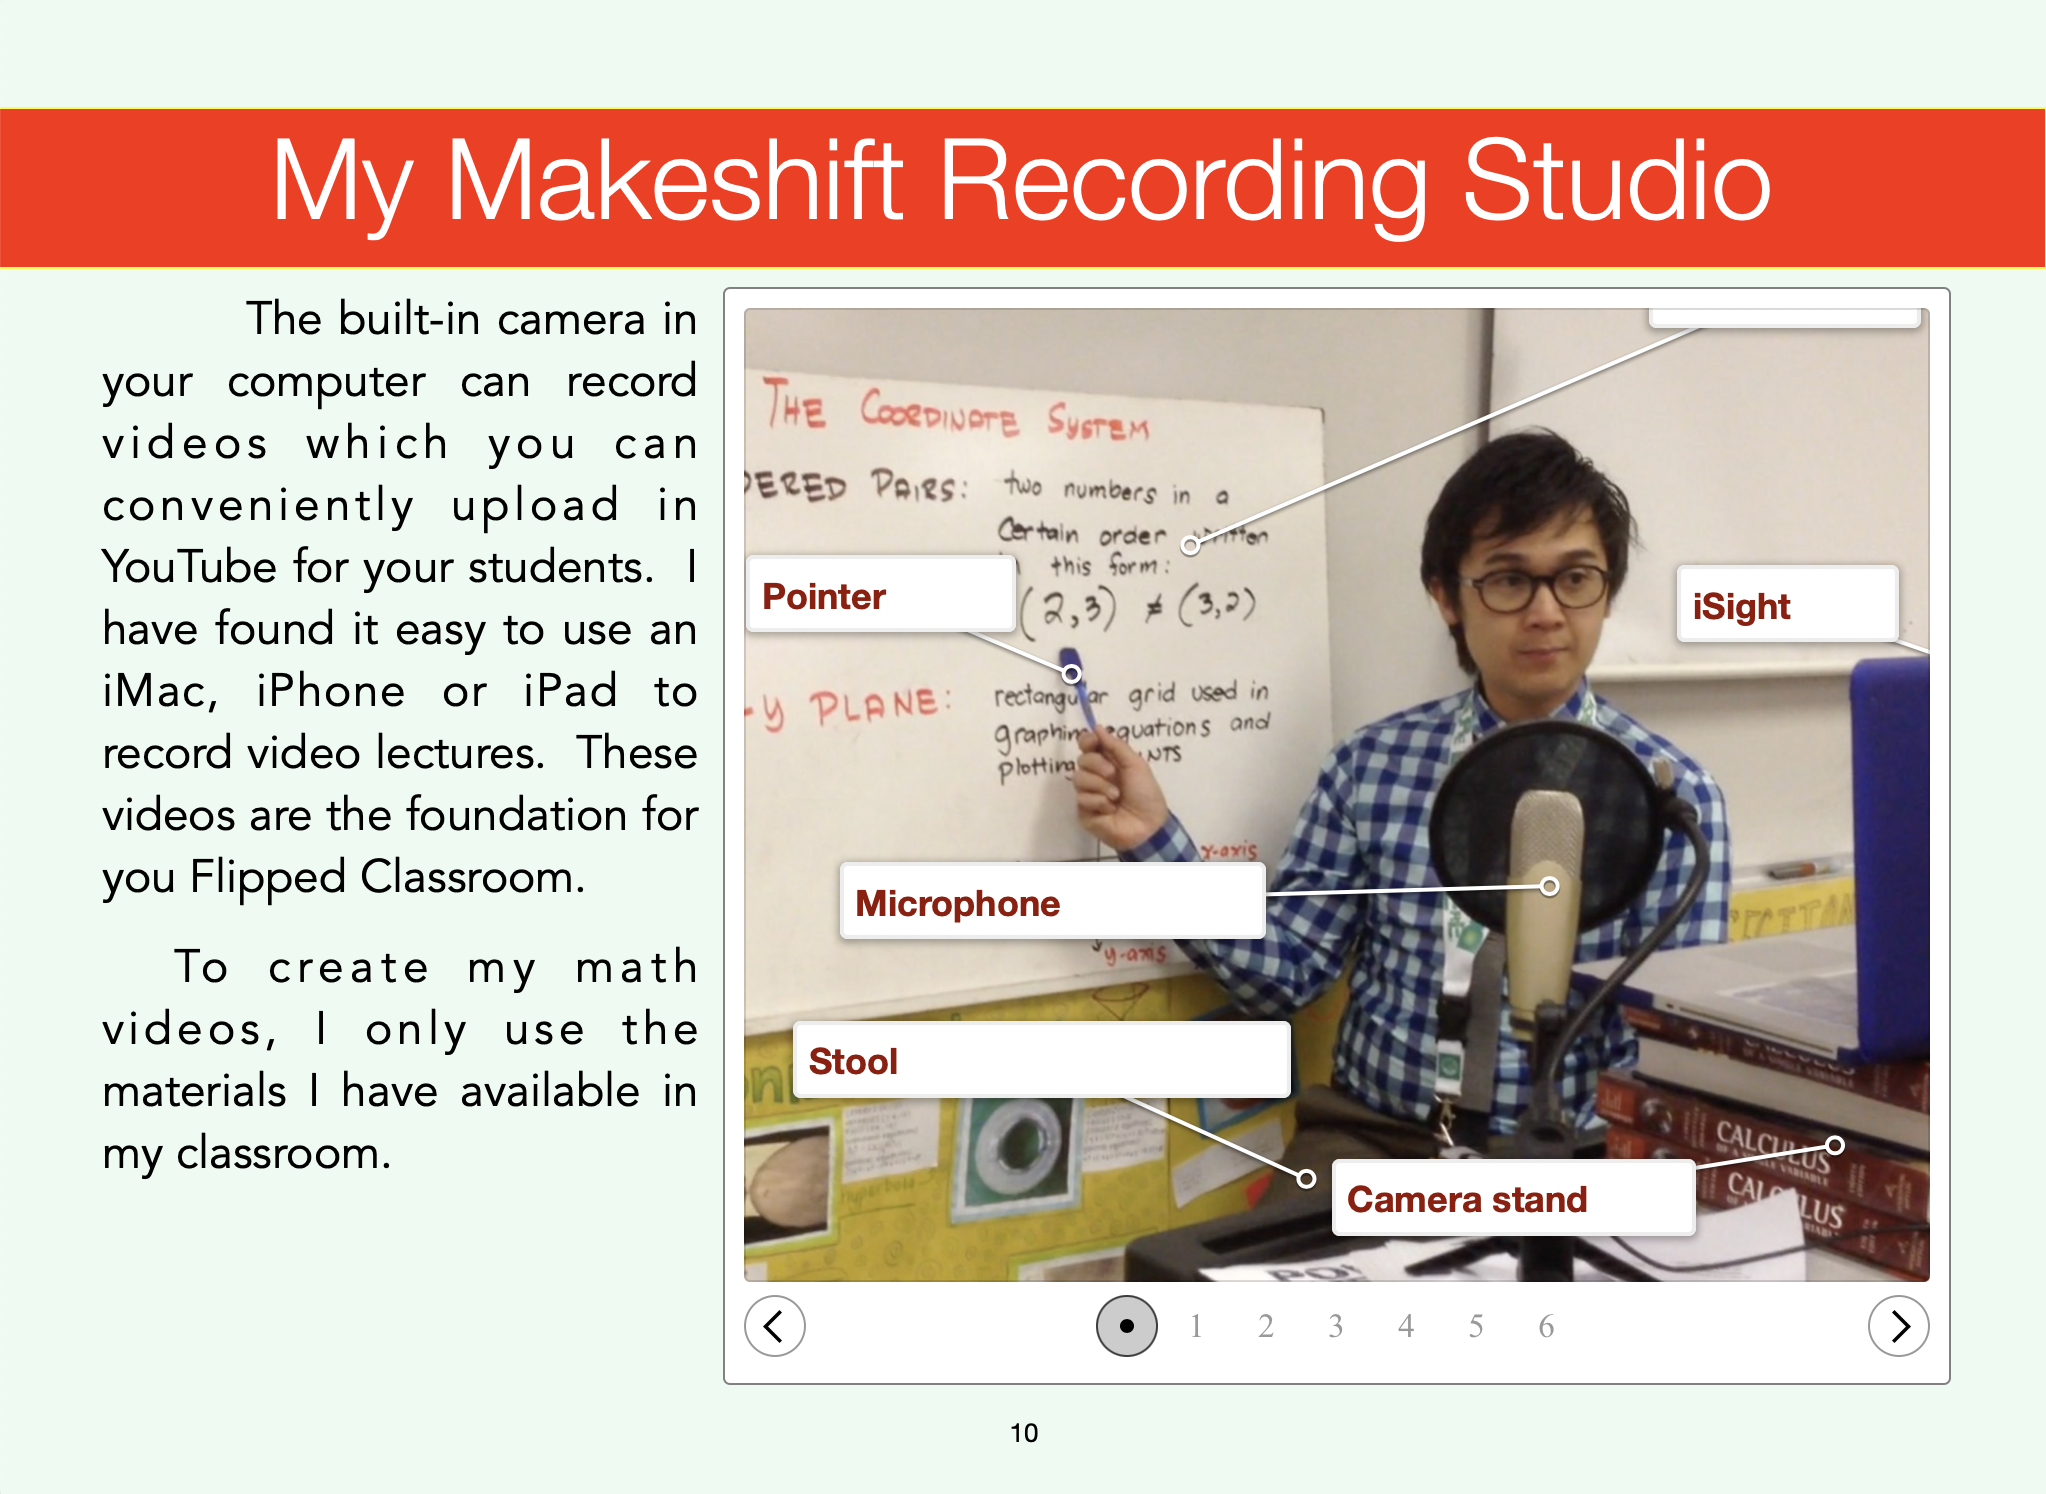 this image shows my basic video recording set-up using the available materials in my classroom